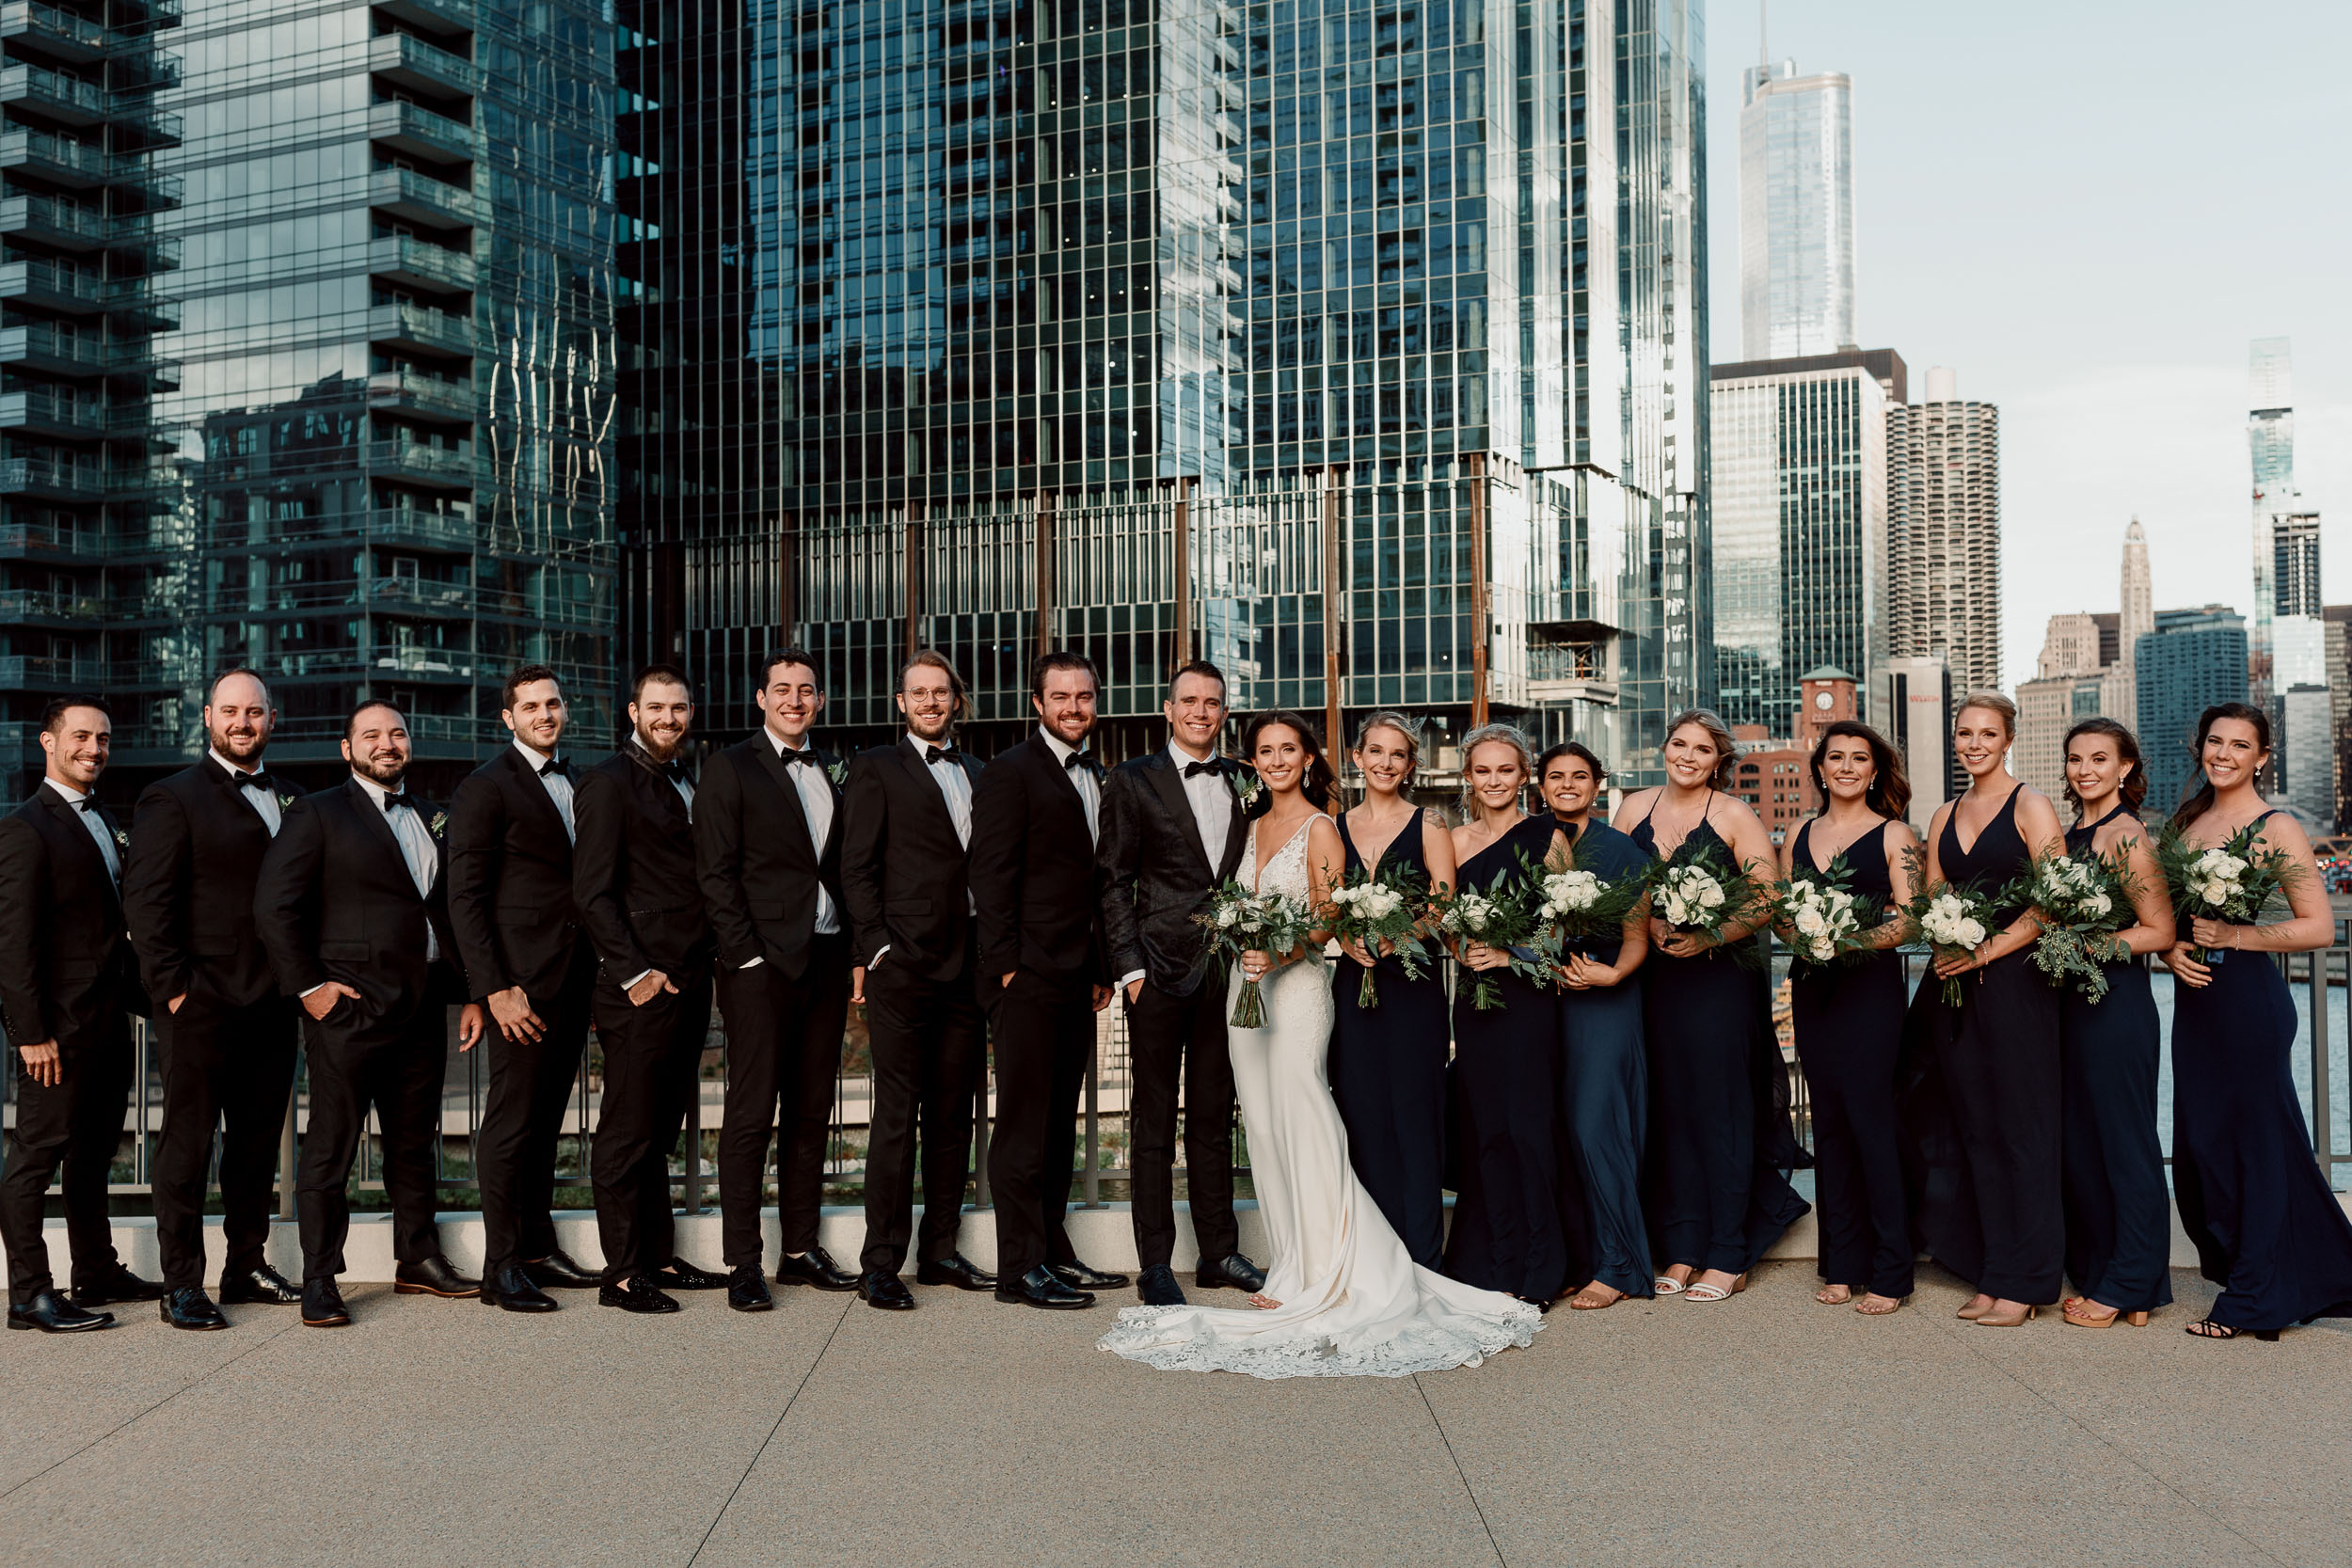 Bridal party for downtown Chicago wedding on the river with skyline
